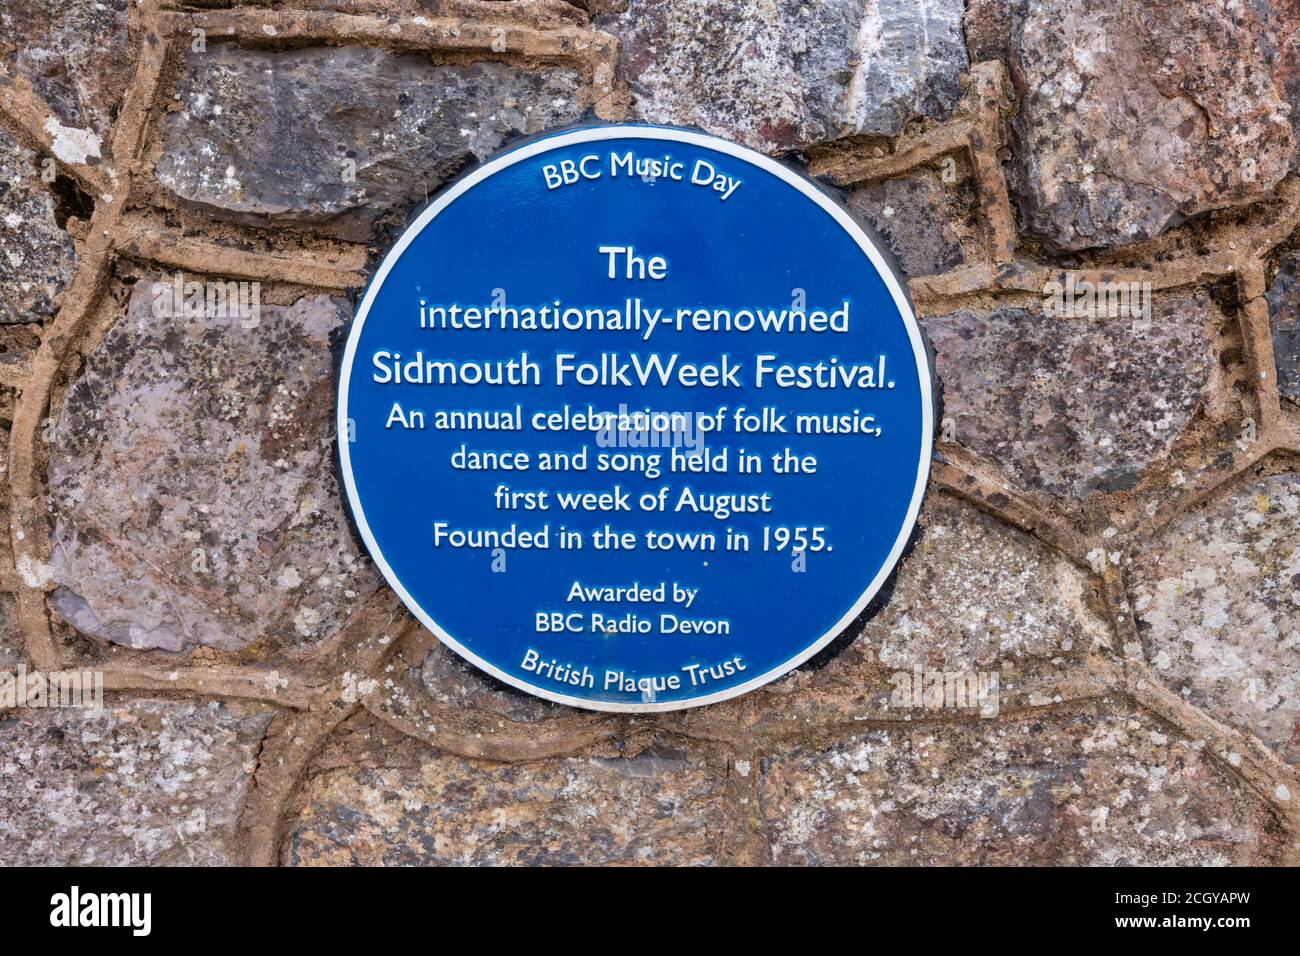 Blue plaque for the BBC Music Day, the annual Sidmouth FolkWeek Festival held in August in Sidmouth, a coastal town in Devon on the south coast Stock Photo